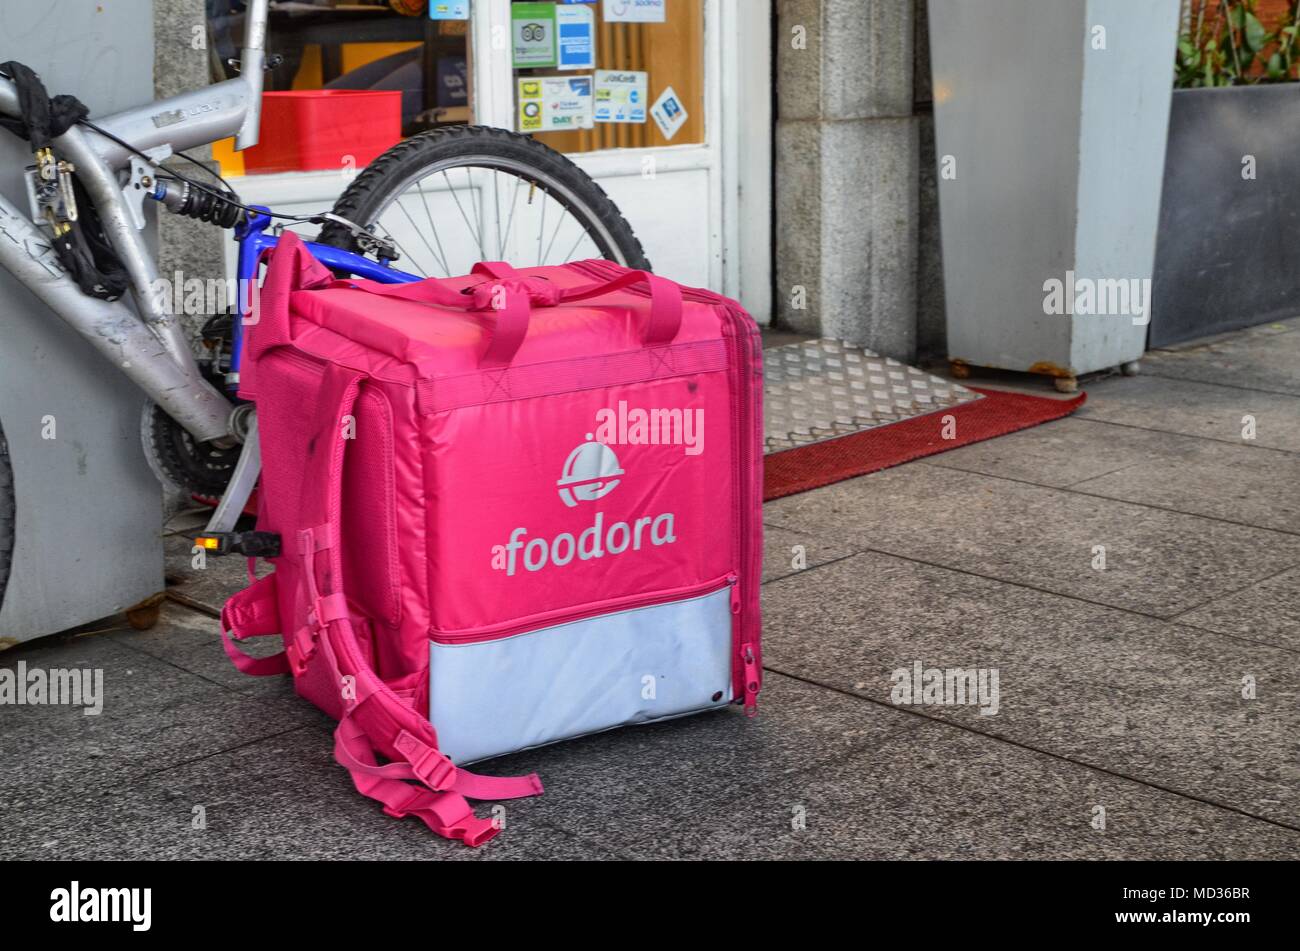 Foodora High Resolution Stock Photography and Images - Alamy